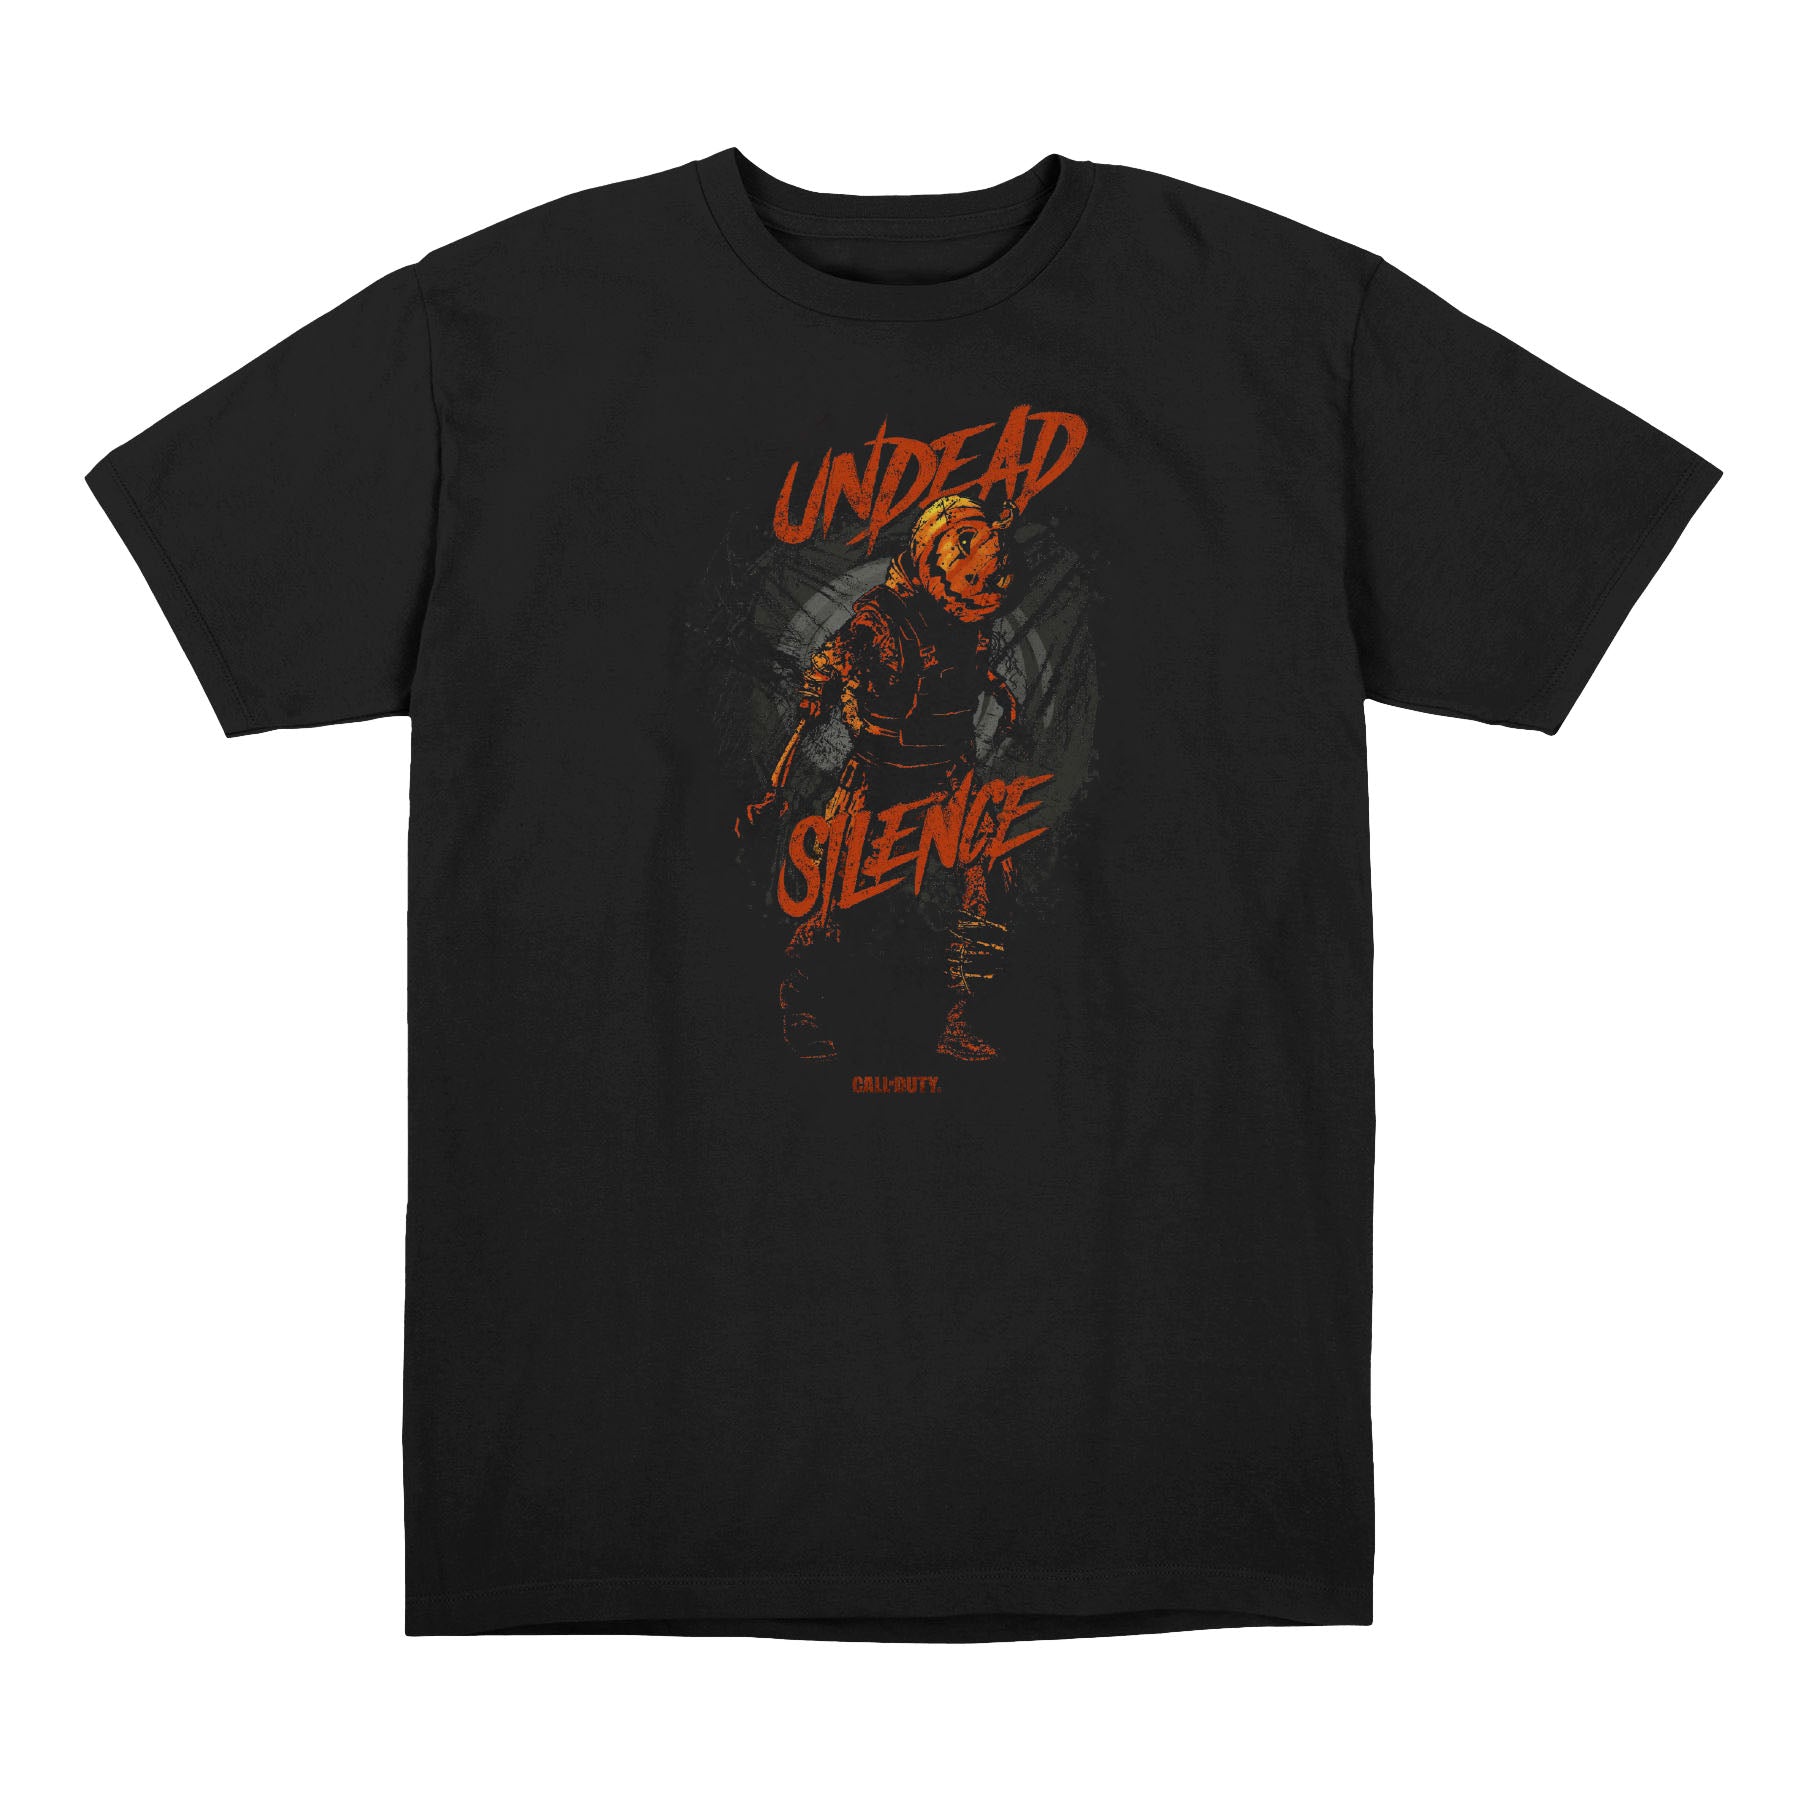 Call of Duty Black Undead Silence T-Shirt - Front View with Undead Silence Design